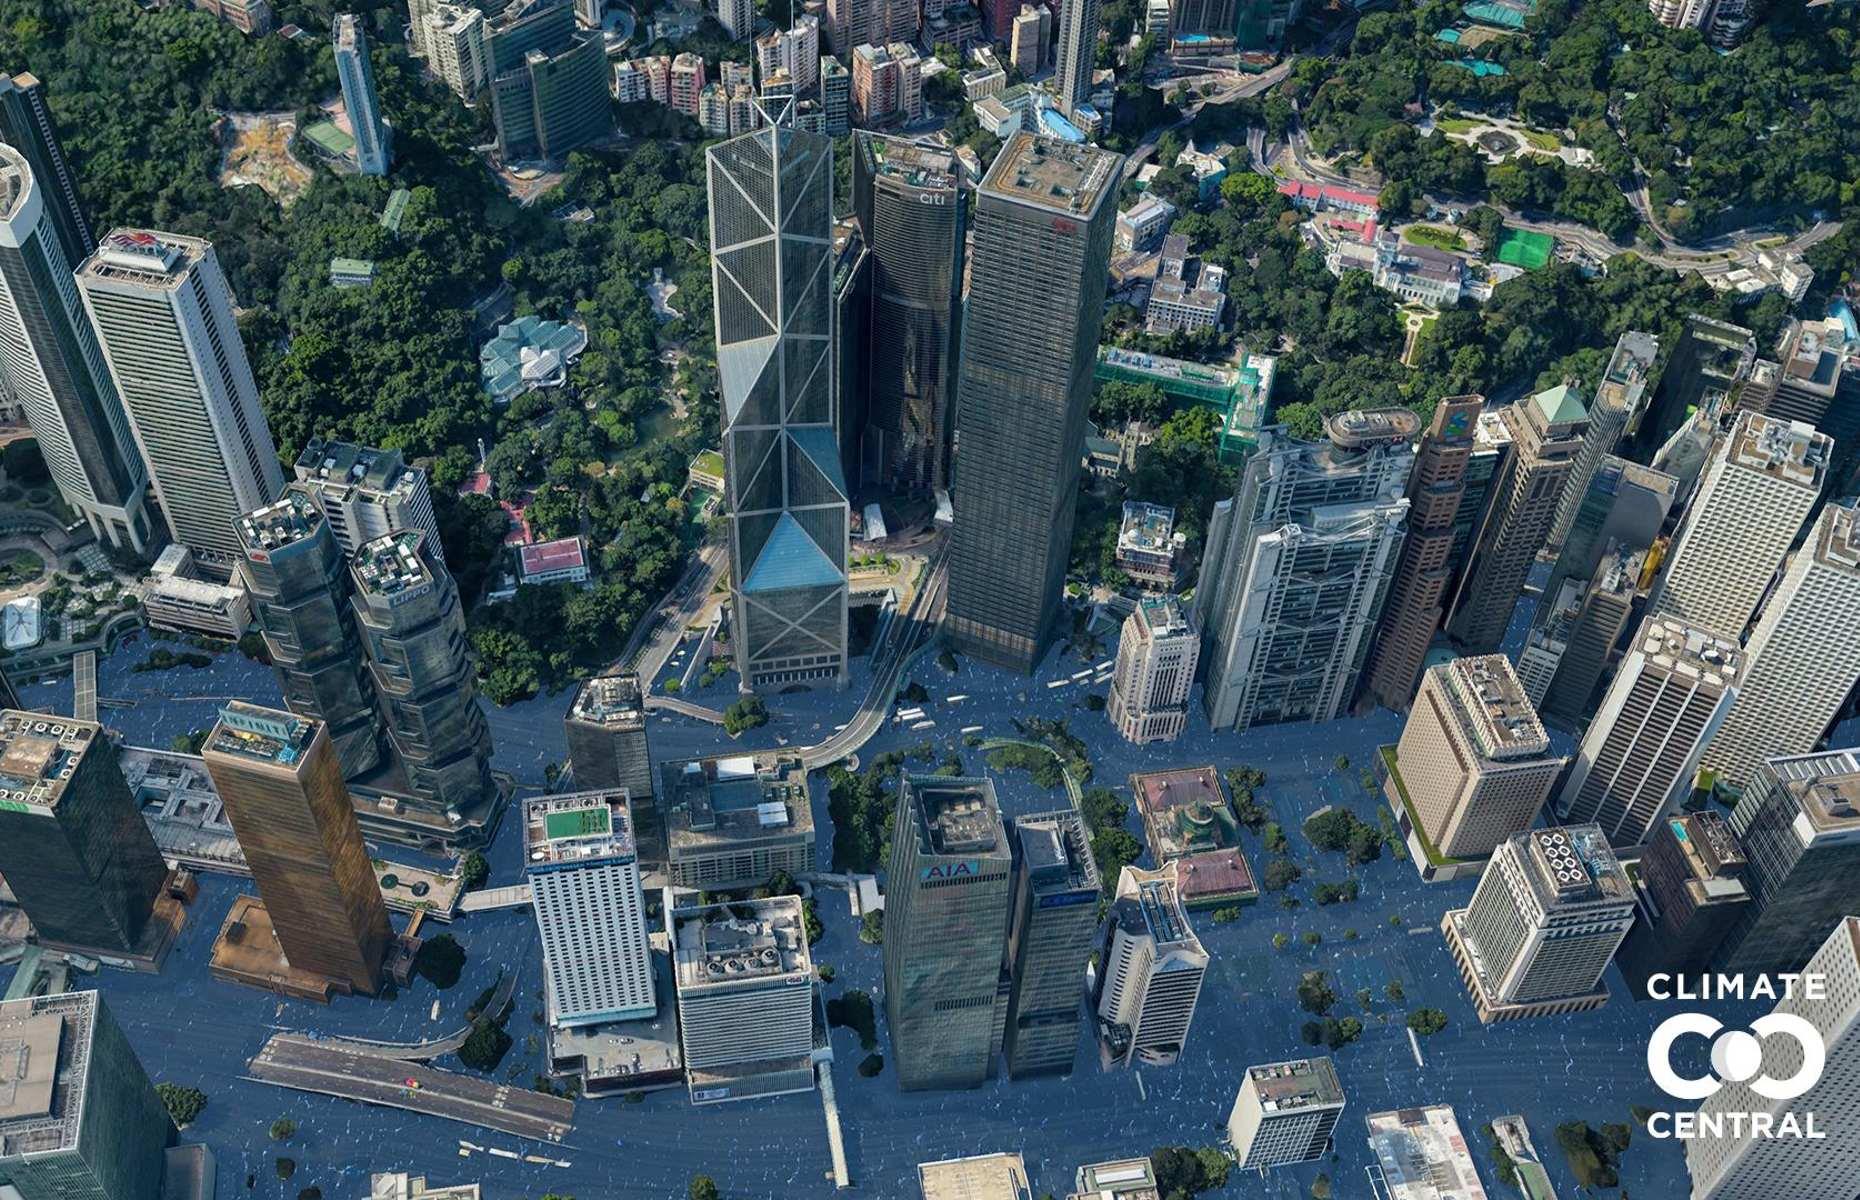 According to risk maps released by Climate Central, large parts of Hong Kong would be underwater in future if global warming continues unchecked at the current rate. This includes the lower parts of the 70-story Bank of China Tower, plus surrounding low-rises, roads, parks and green spaces.